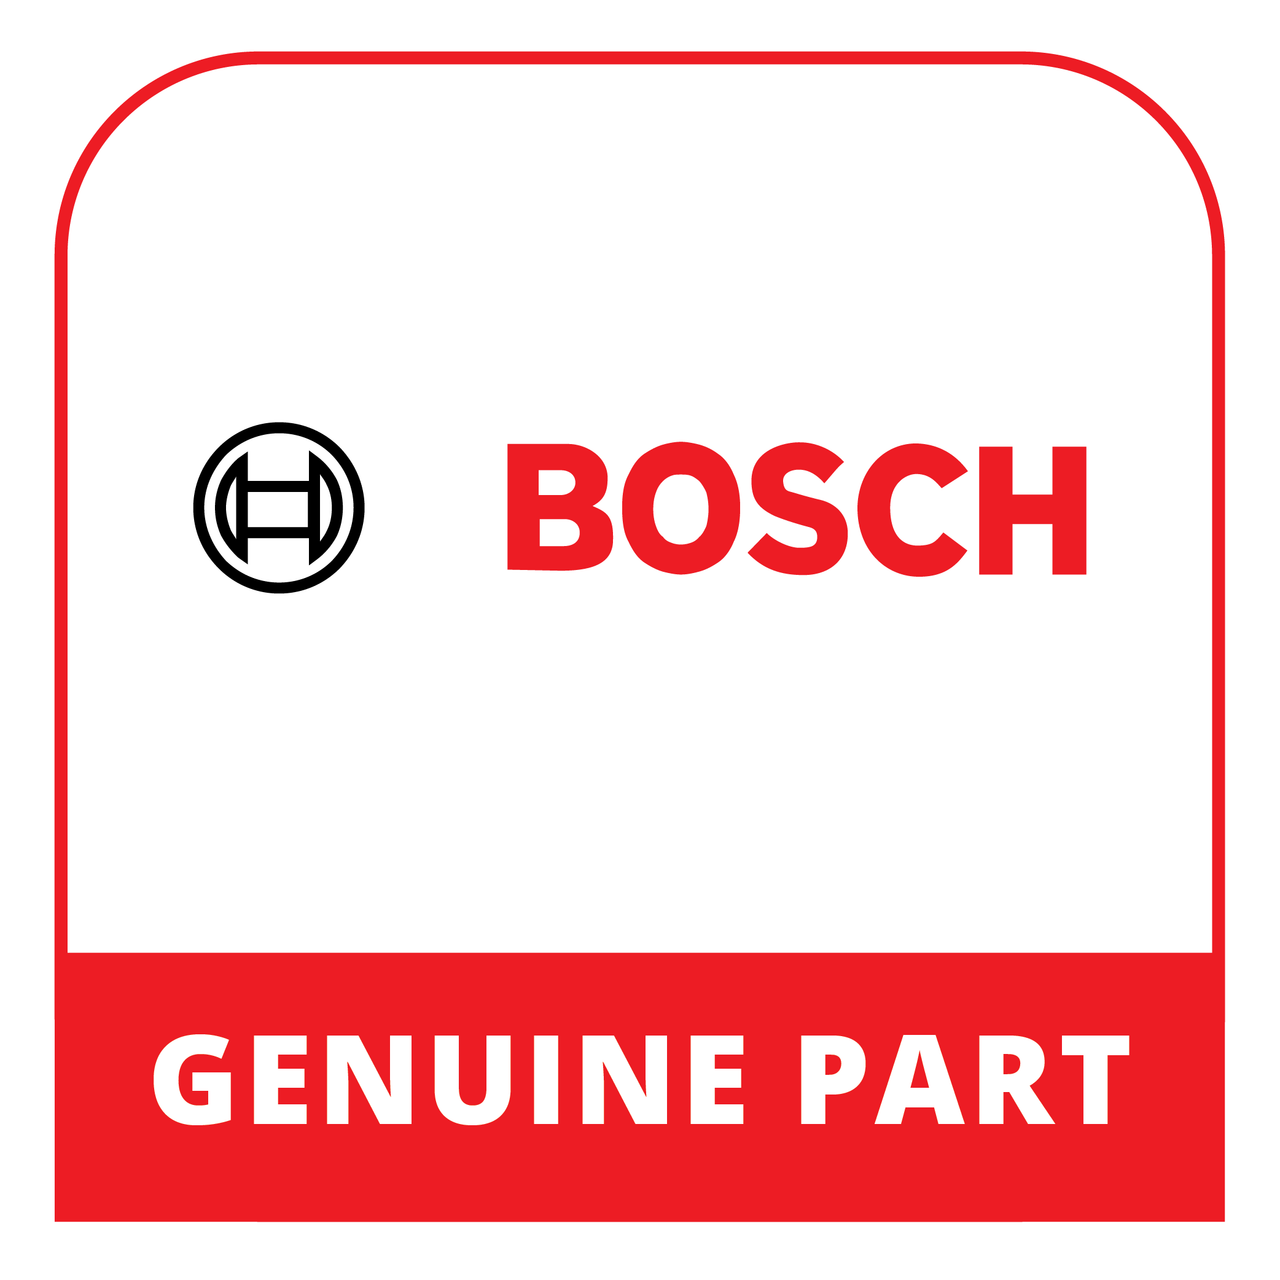 Bosch (Thermador) 10008500 - Bearing Bush - Genuine Bosch (Thermador) Part